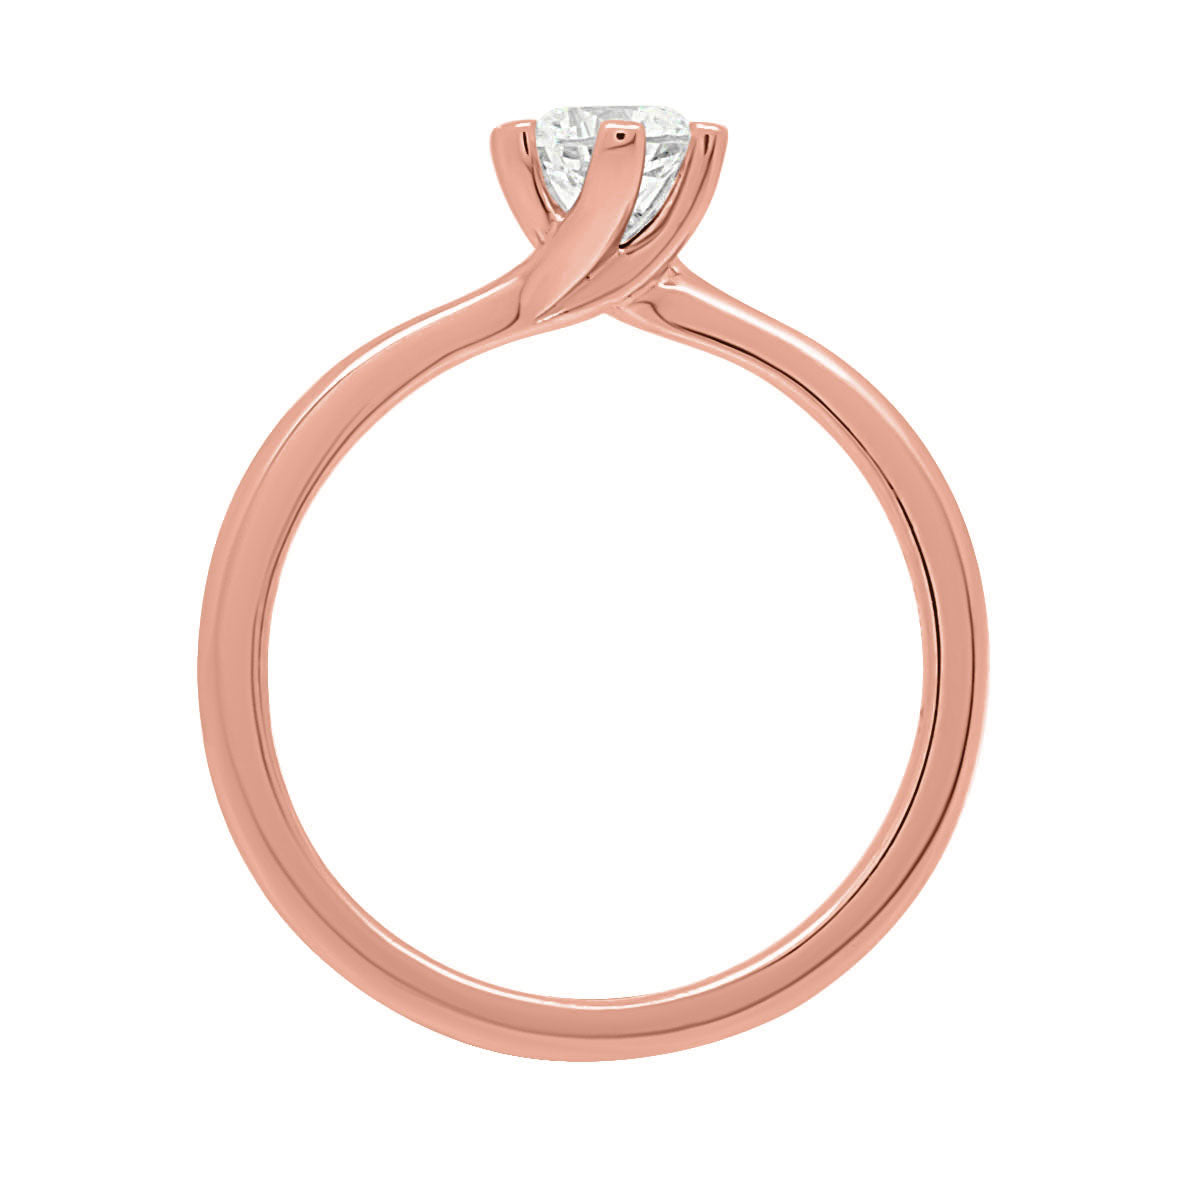 6 Claw Solitaire Twist Ring in 18kt rose golf